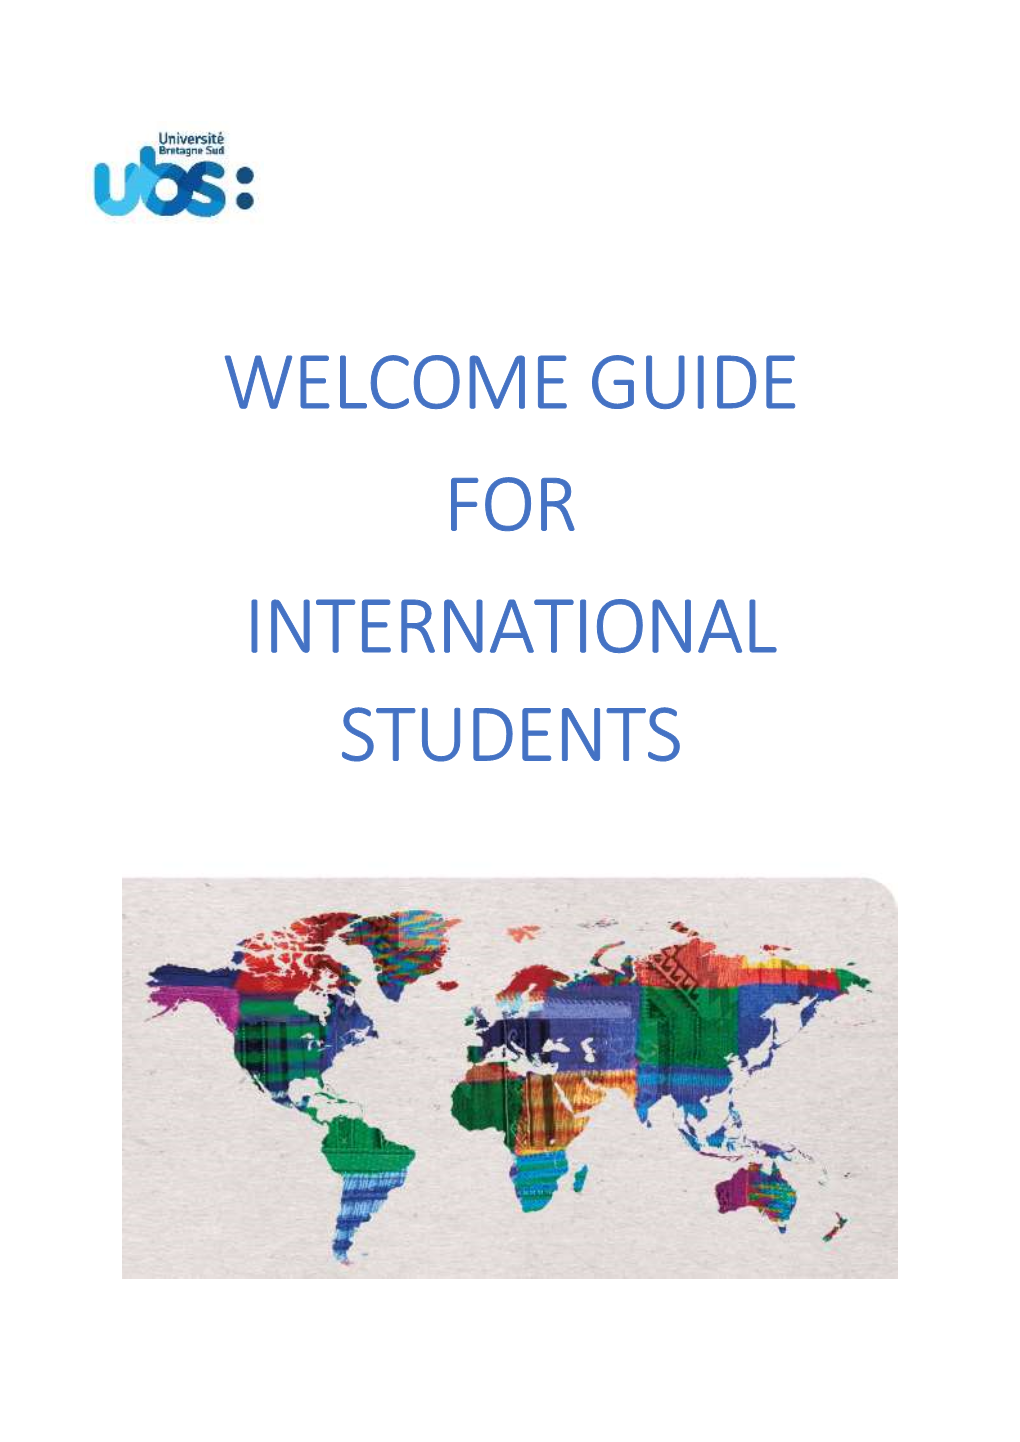 Welcome Guide for International Students